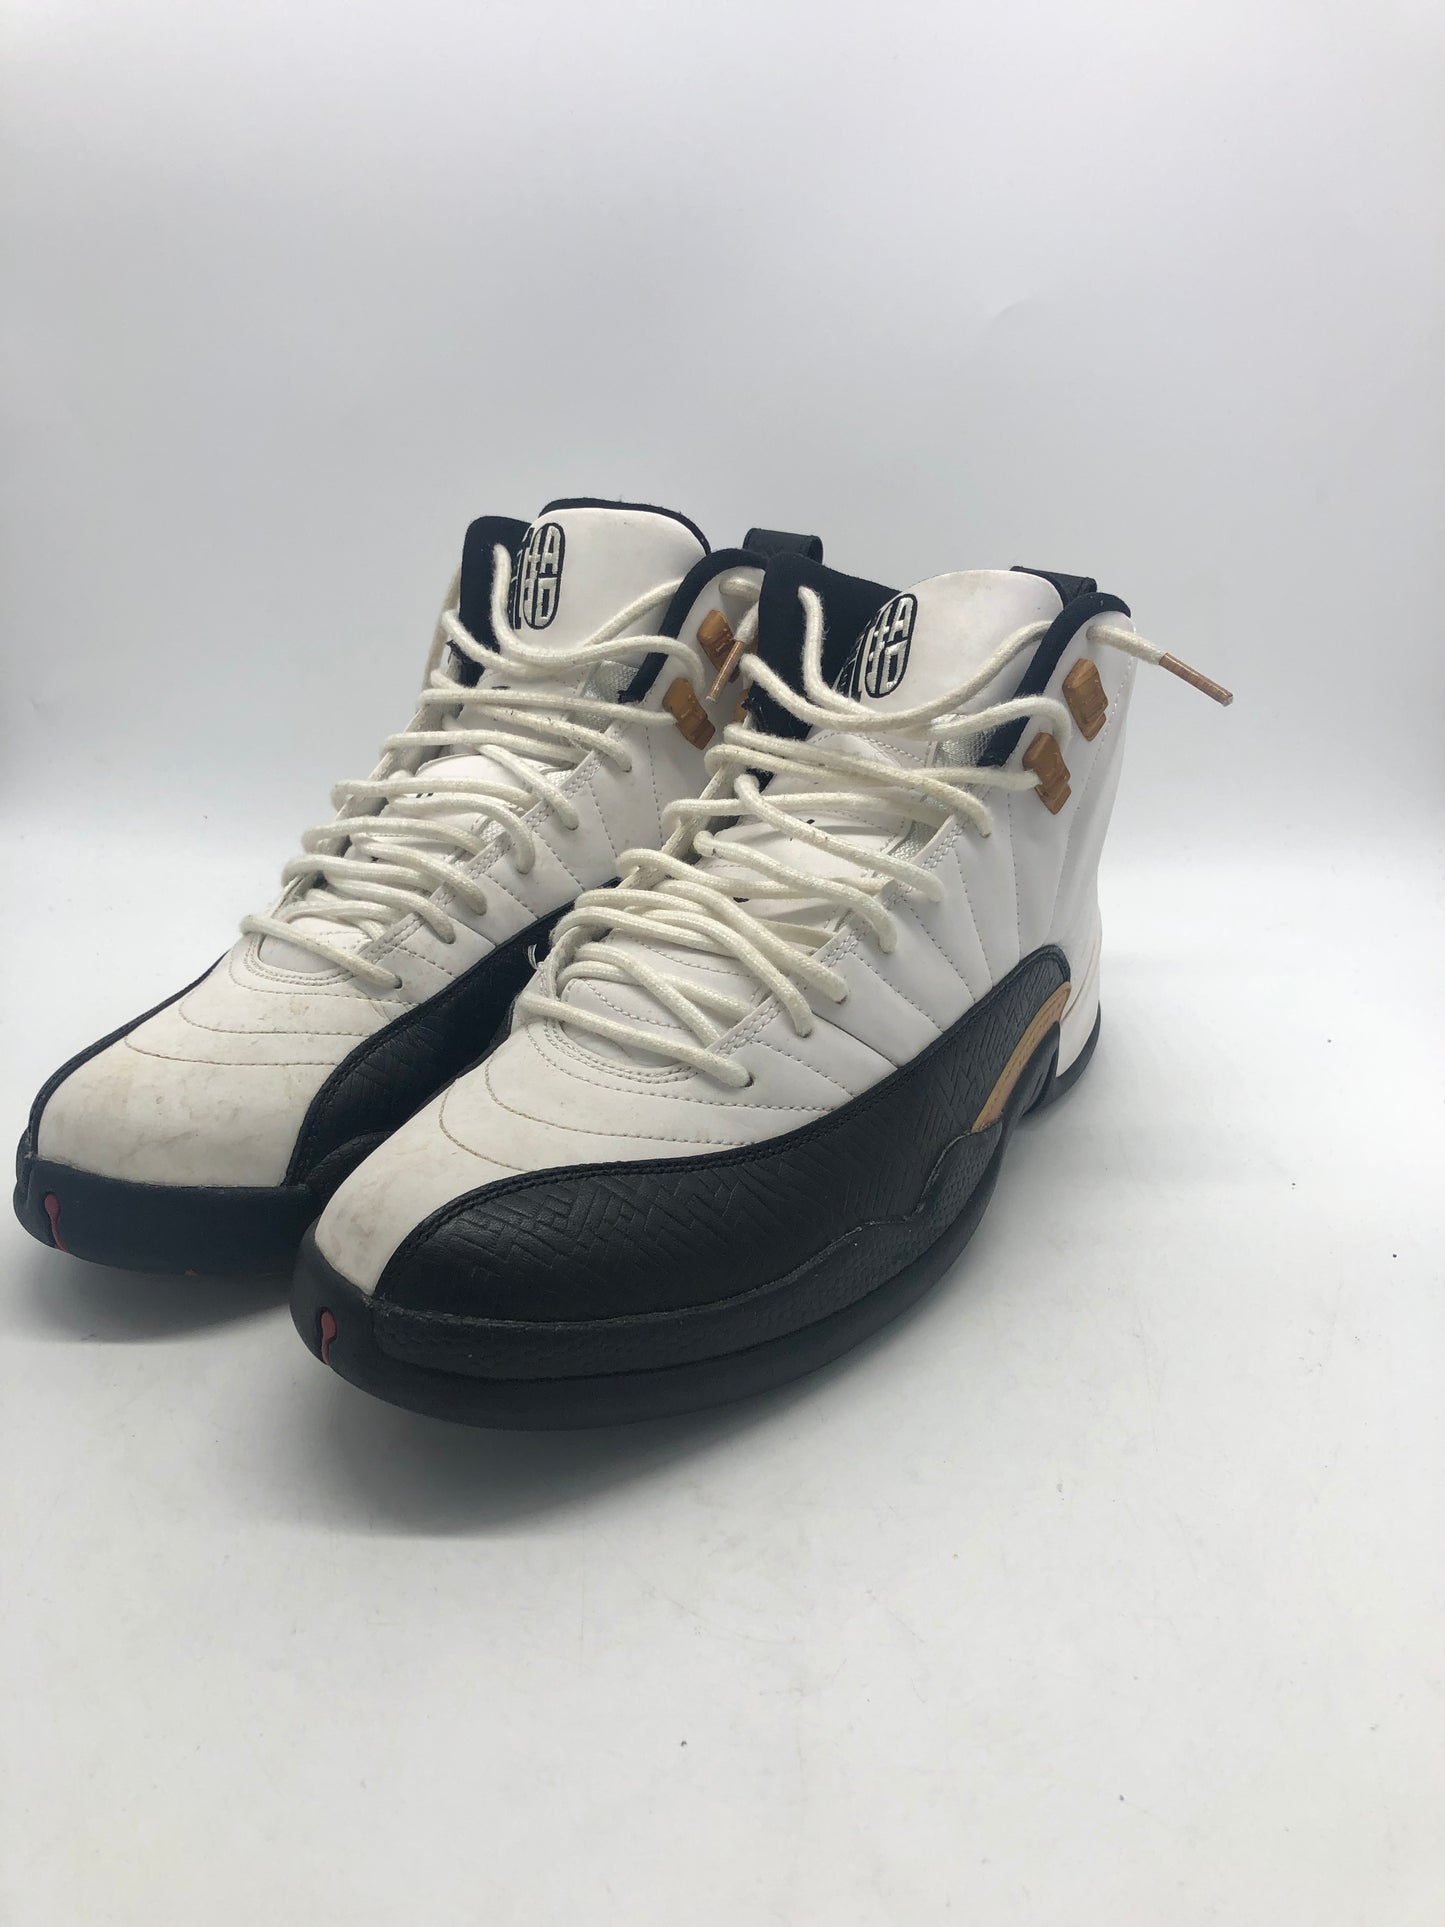 Load image into Gallery viewer, Air Jordan 12 Chinese New Years Sz 11.5
